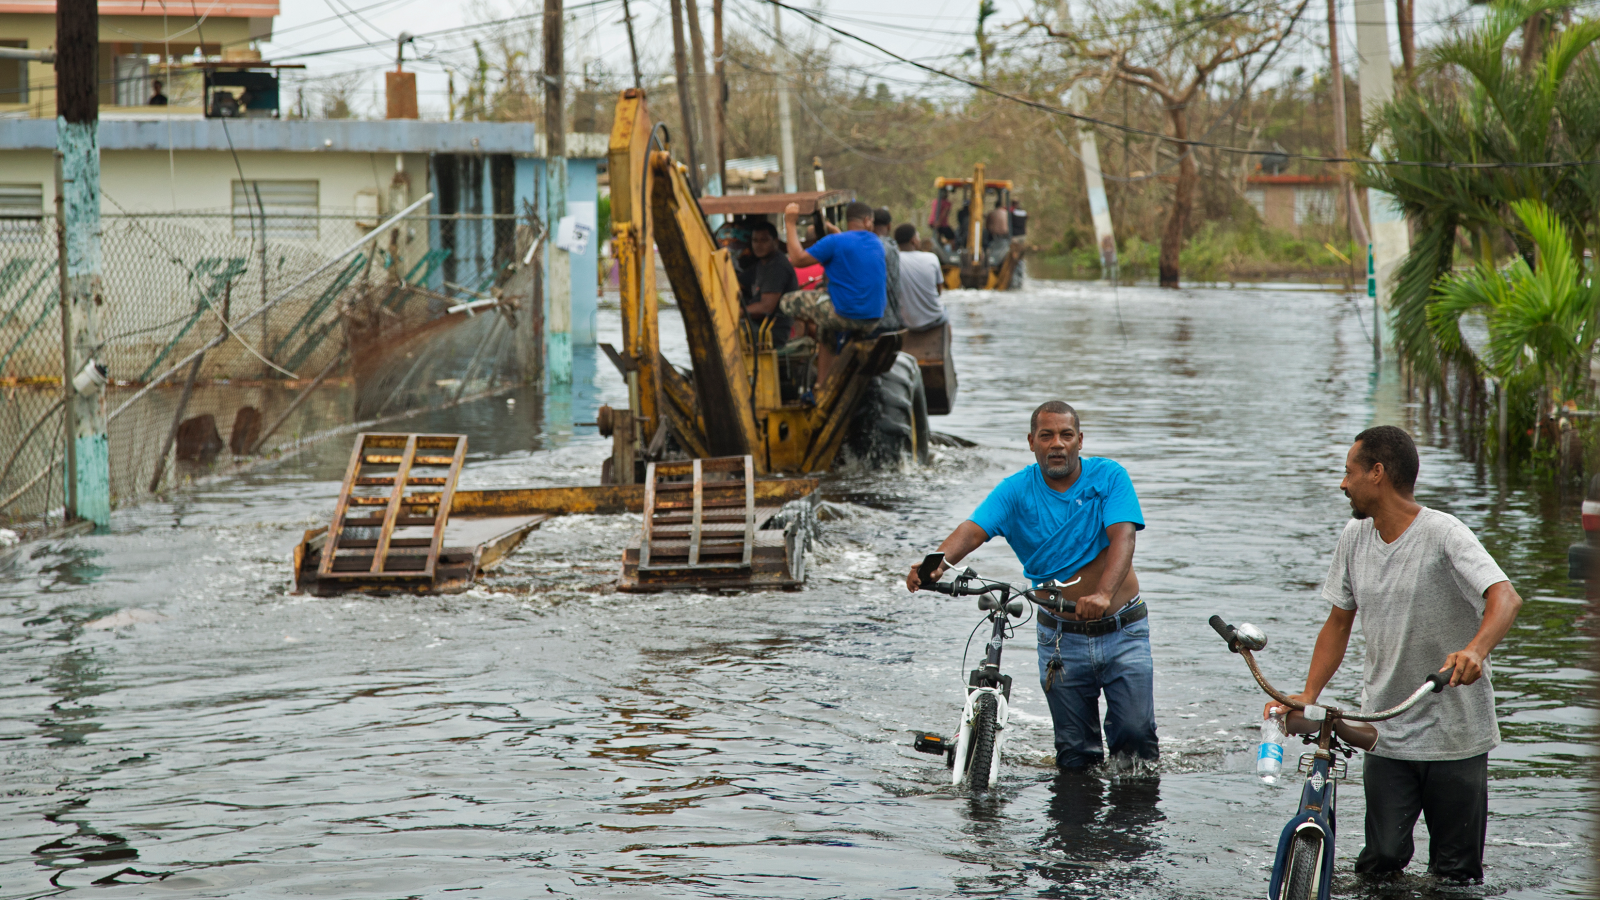 People stand in floodwater in the aftermath of Hurricane Maria in Puerto Rico in 2017.